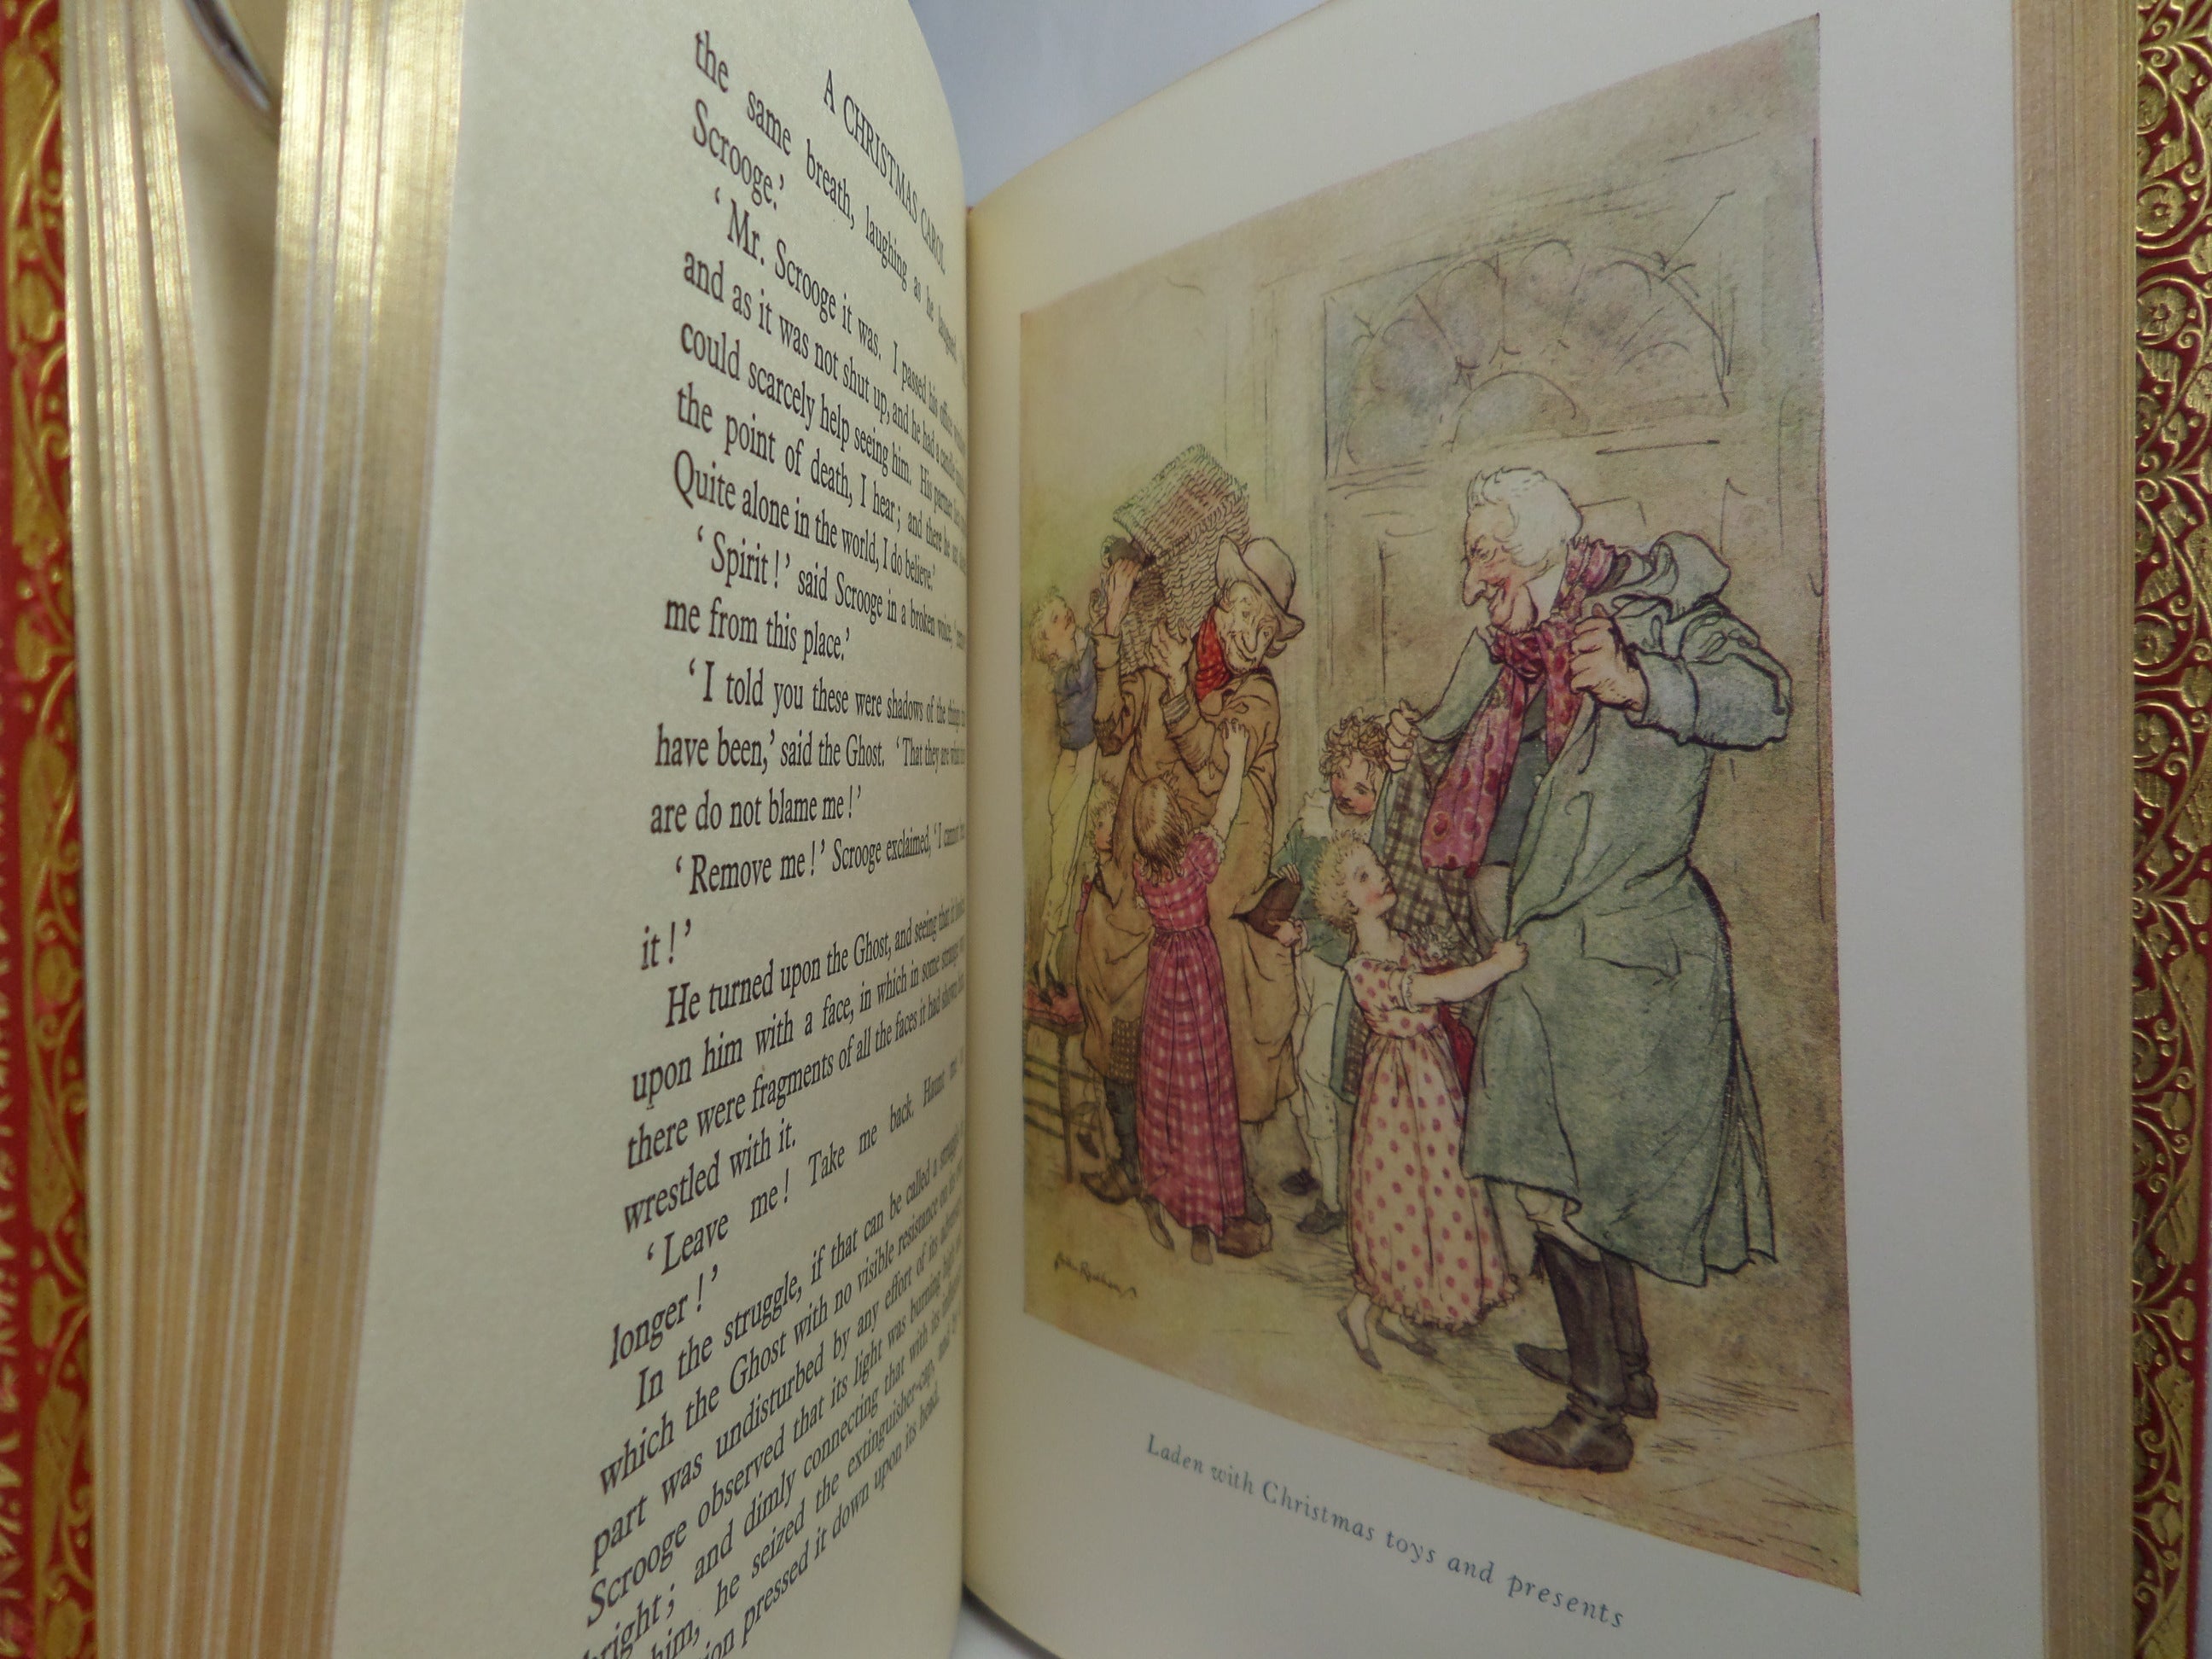 A CHRISTMAS CAROL BY CHARLES DICKENS ILLUSTRATED BY ARTHUR RACKHAM, FINE BINDING